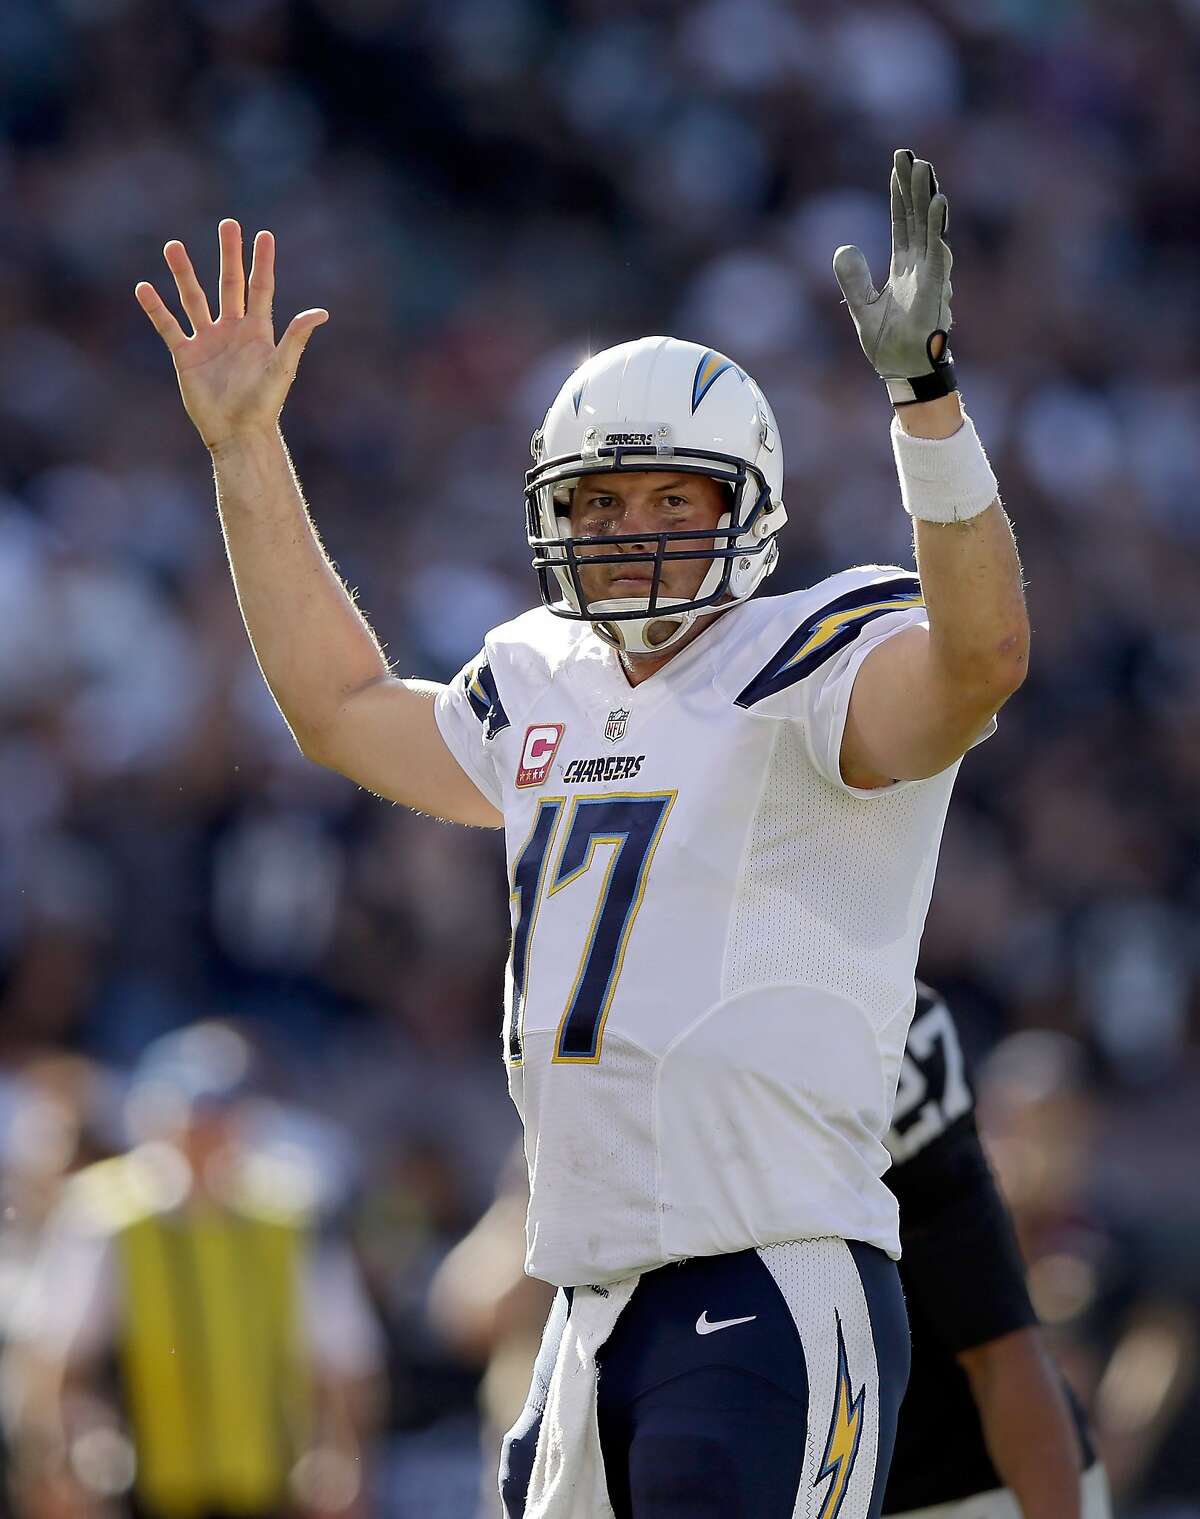 OAKLAND, CA - OCTOBER 12: Philip Rivers #17 of the San Diego Chargers reacts after the Chargers scored a touchdown to take the lead over the Oakland Raiders in the fourth quarter at O.co Coliseum on October 12, 2014 in Oakland, California. (Photo by Ezra Shaw/Getty Images)